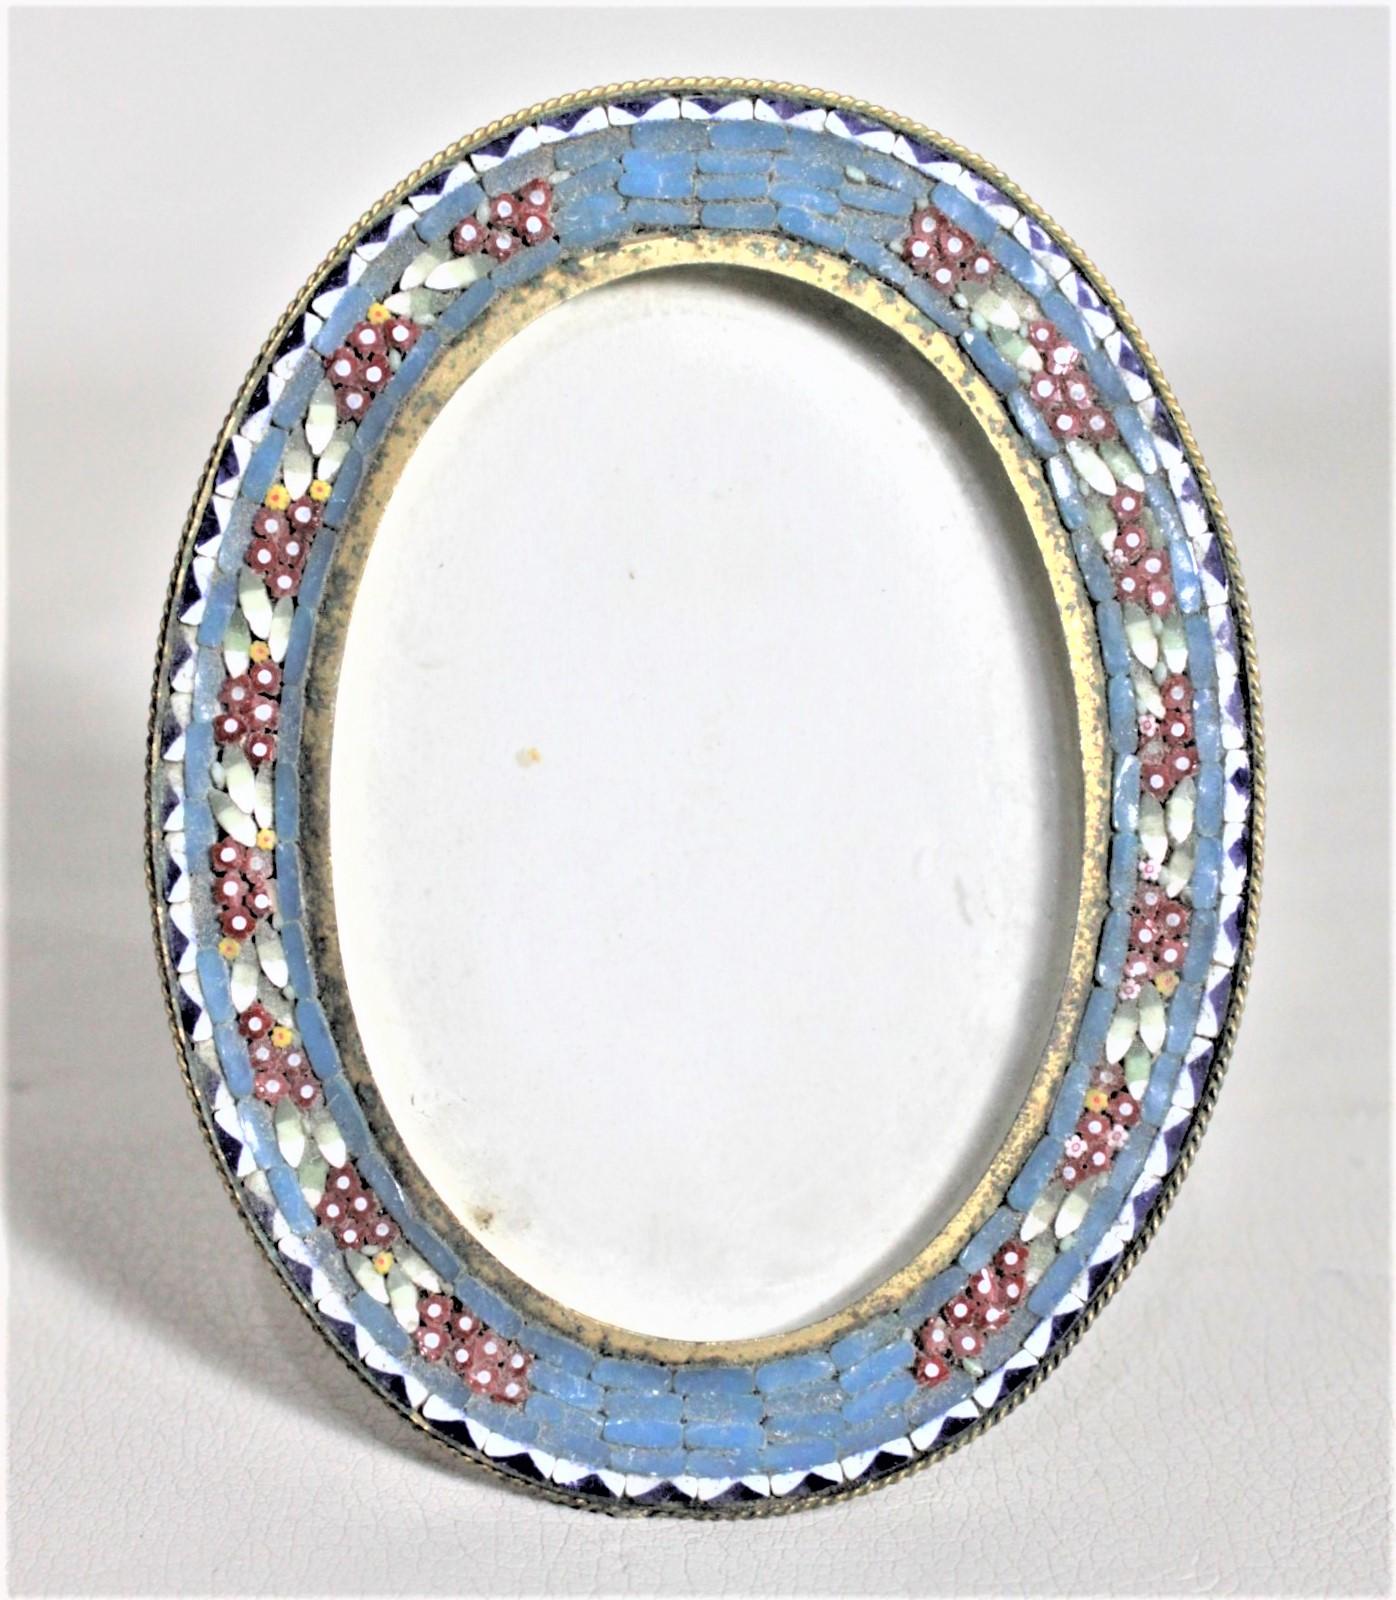 This small oval art glass and brass picture frame is unsigned, but presumed to have been made in Italy in approximately 1920. The frame is composed of a brass frame with art glass caning on the front done with a green and white geometric border and